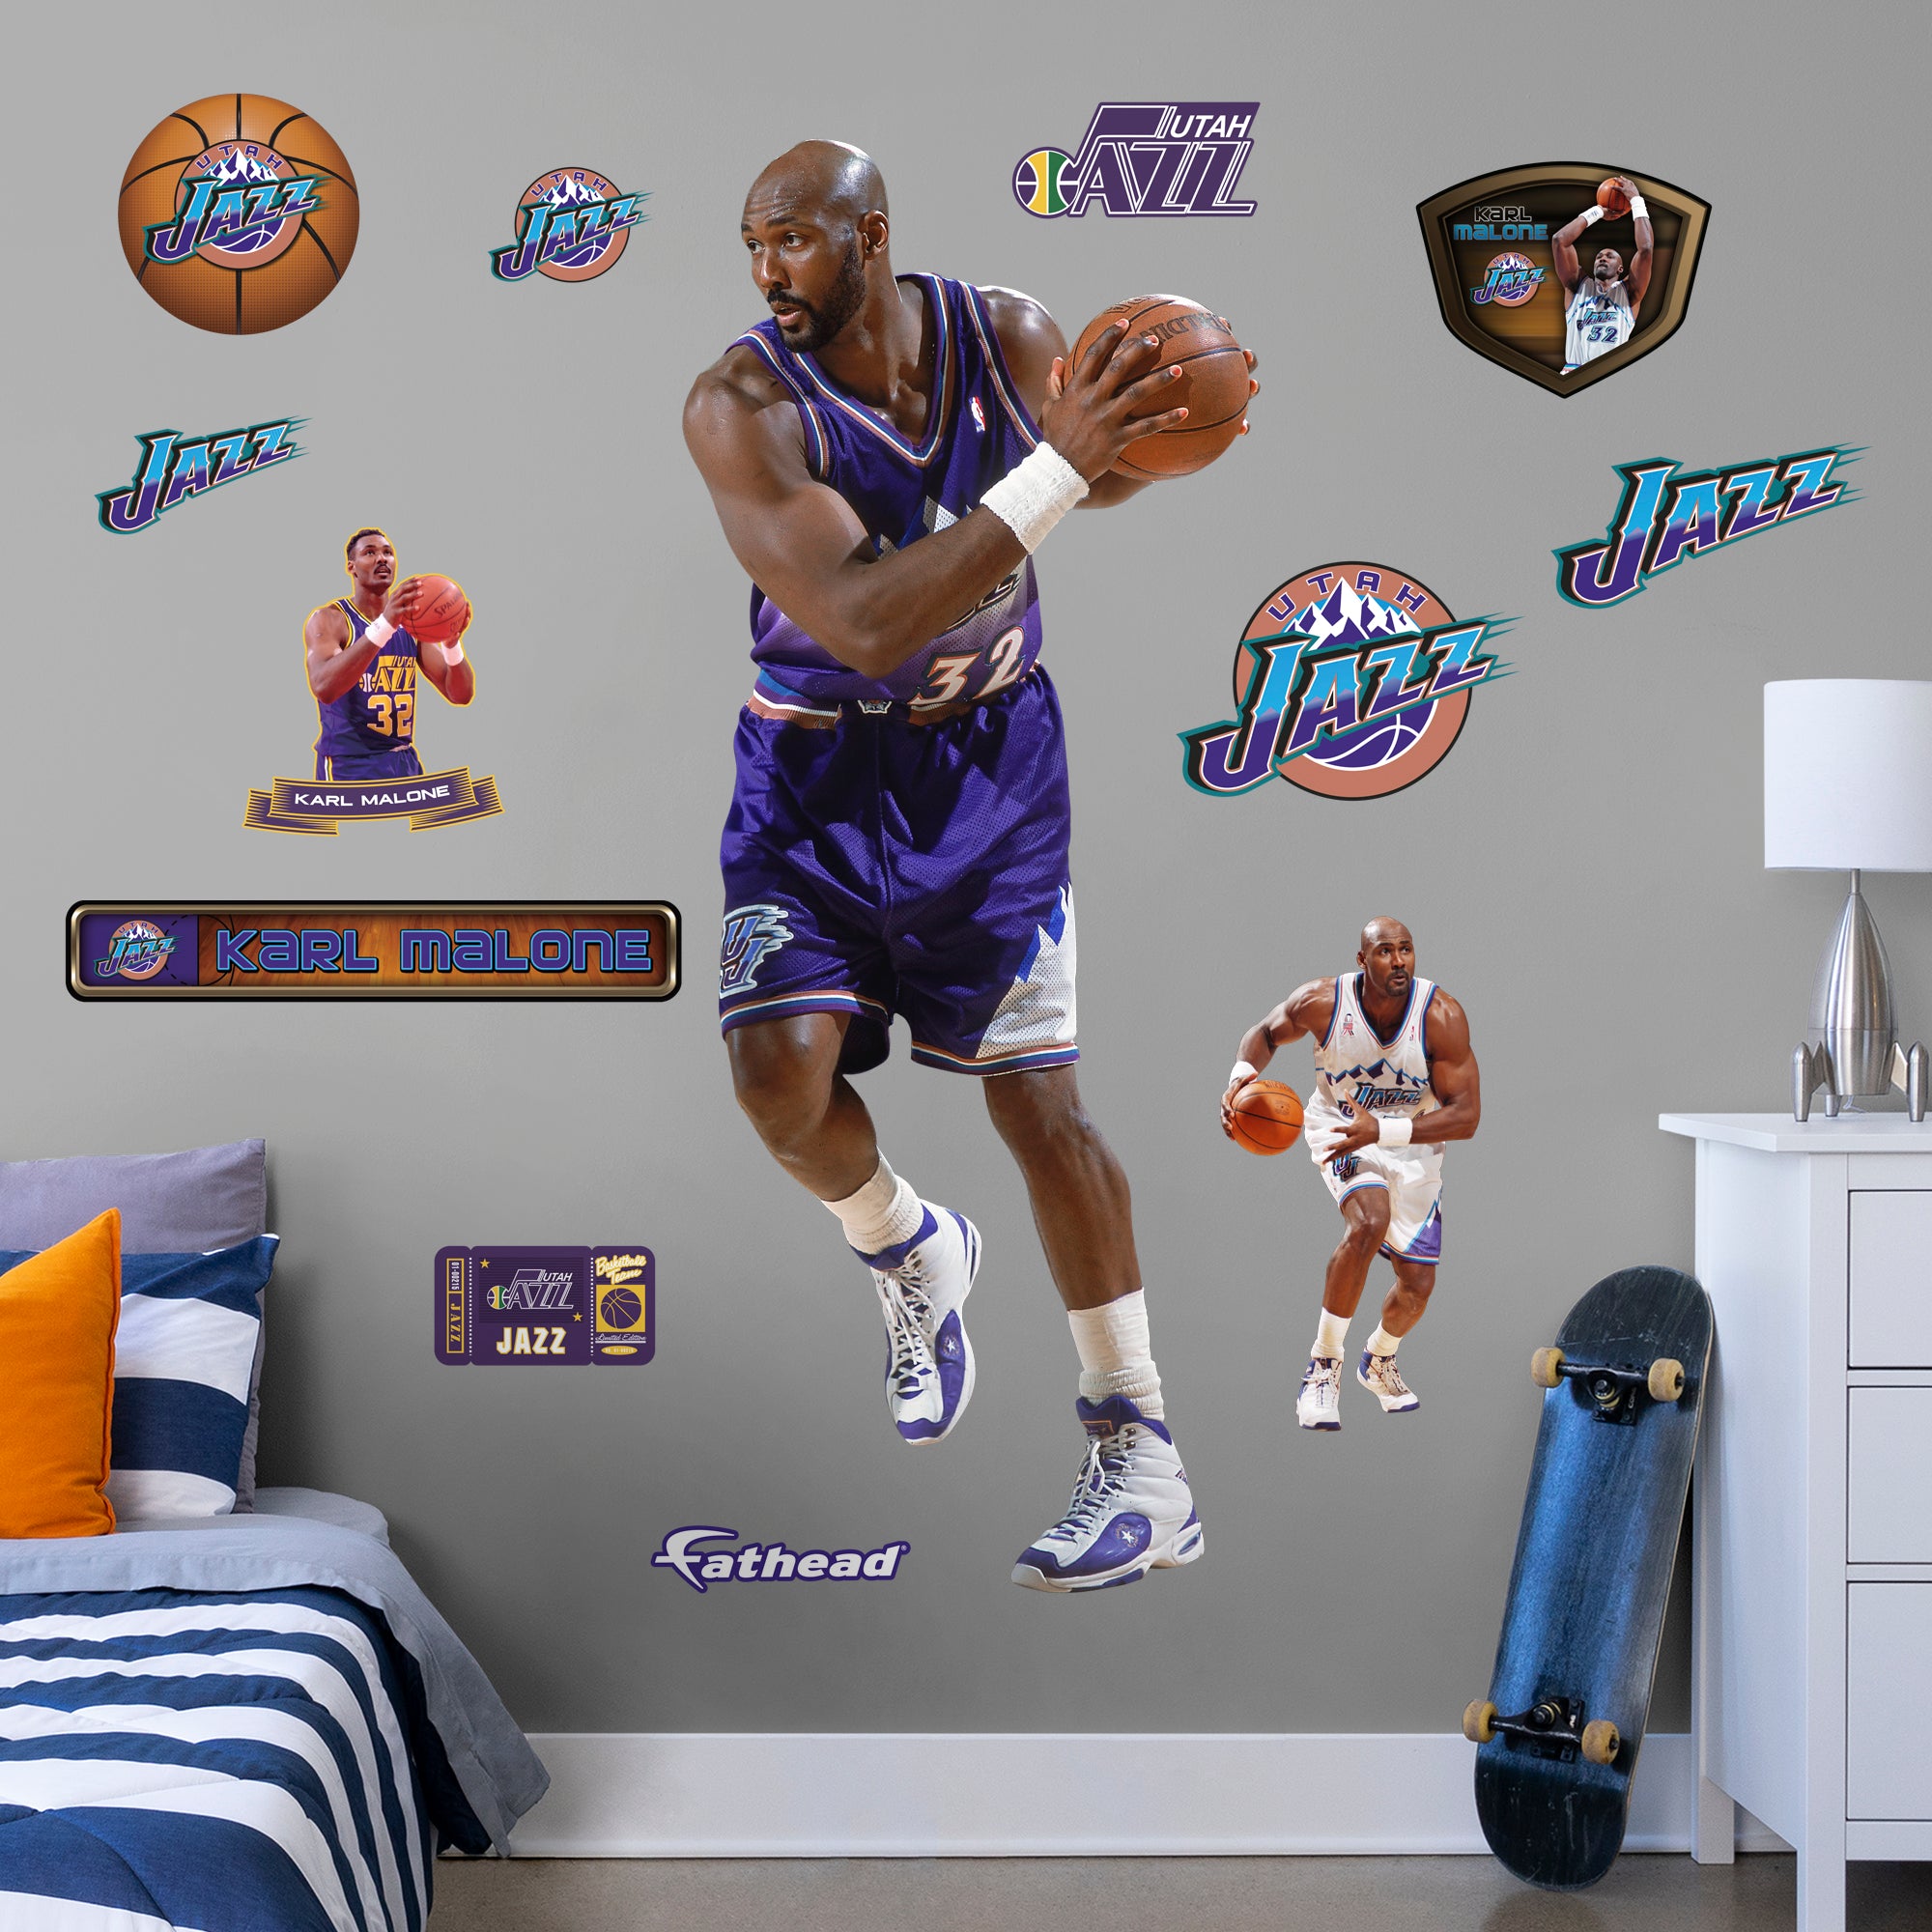 Karl Malone Legend - Officially Licensed NBA Removable Wall Decal Life-Size Athlete + 12 Decals (35"W x 82"H) by Fathead | Vinyl